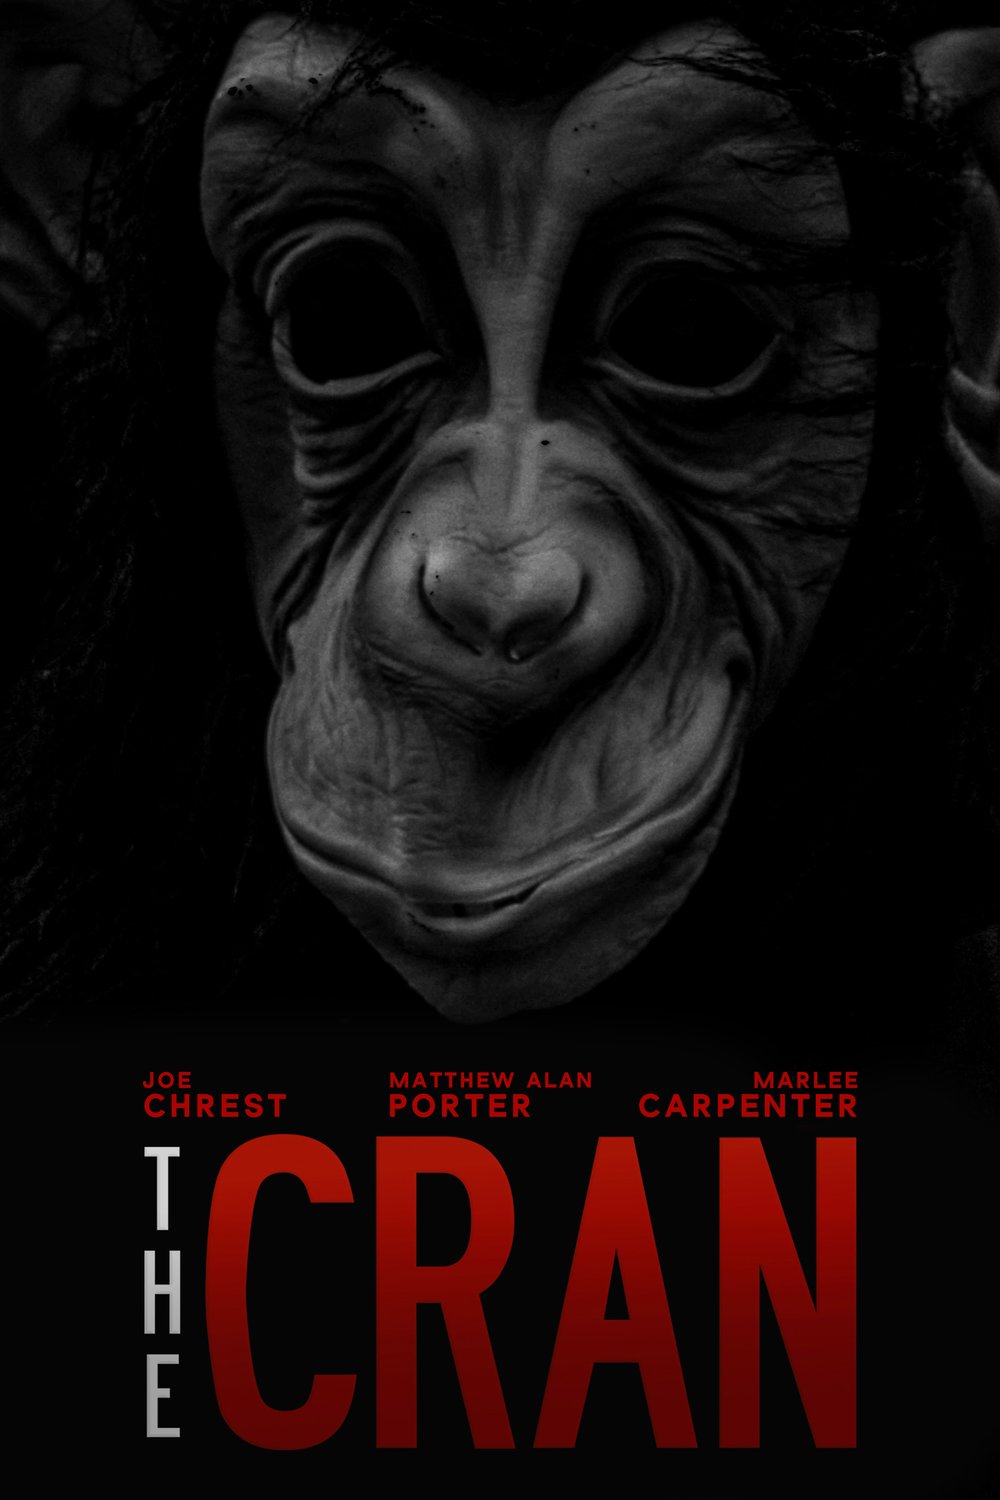 Poster of the movie The Cran